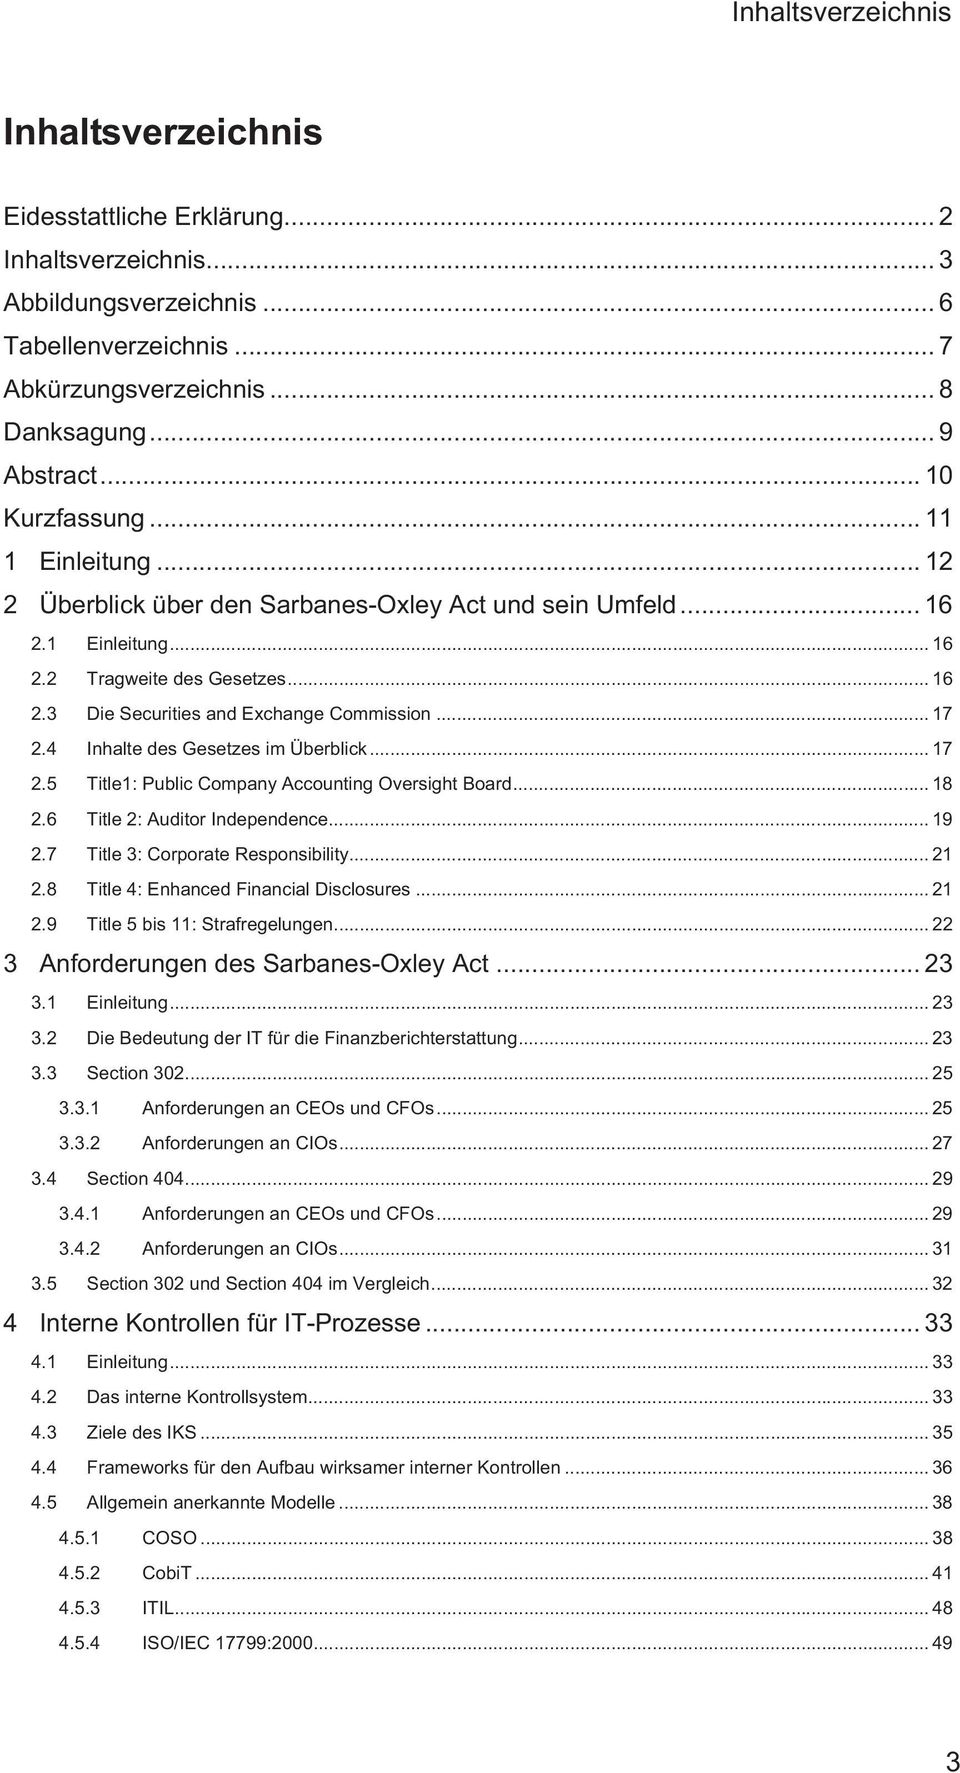 .. 17 2.4 Inhalte des Gesetzes im Überblick... 17 2.5 Title1: Public Company Accounting Oversight Board... 18 2.6 Title 2: Auditor Independence... 19 2.7 Title 3: Corporate Responsibility... 21 2.